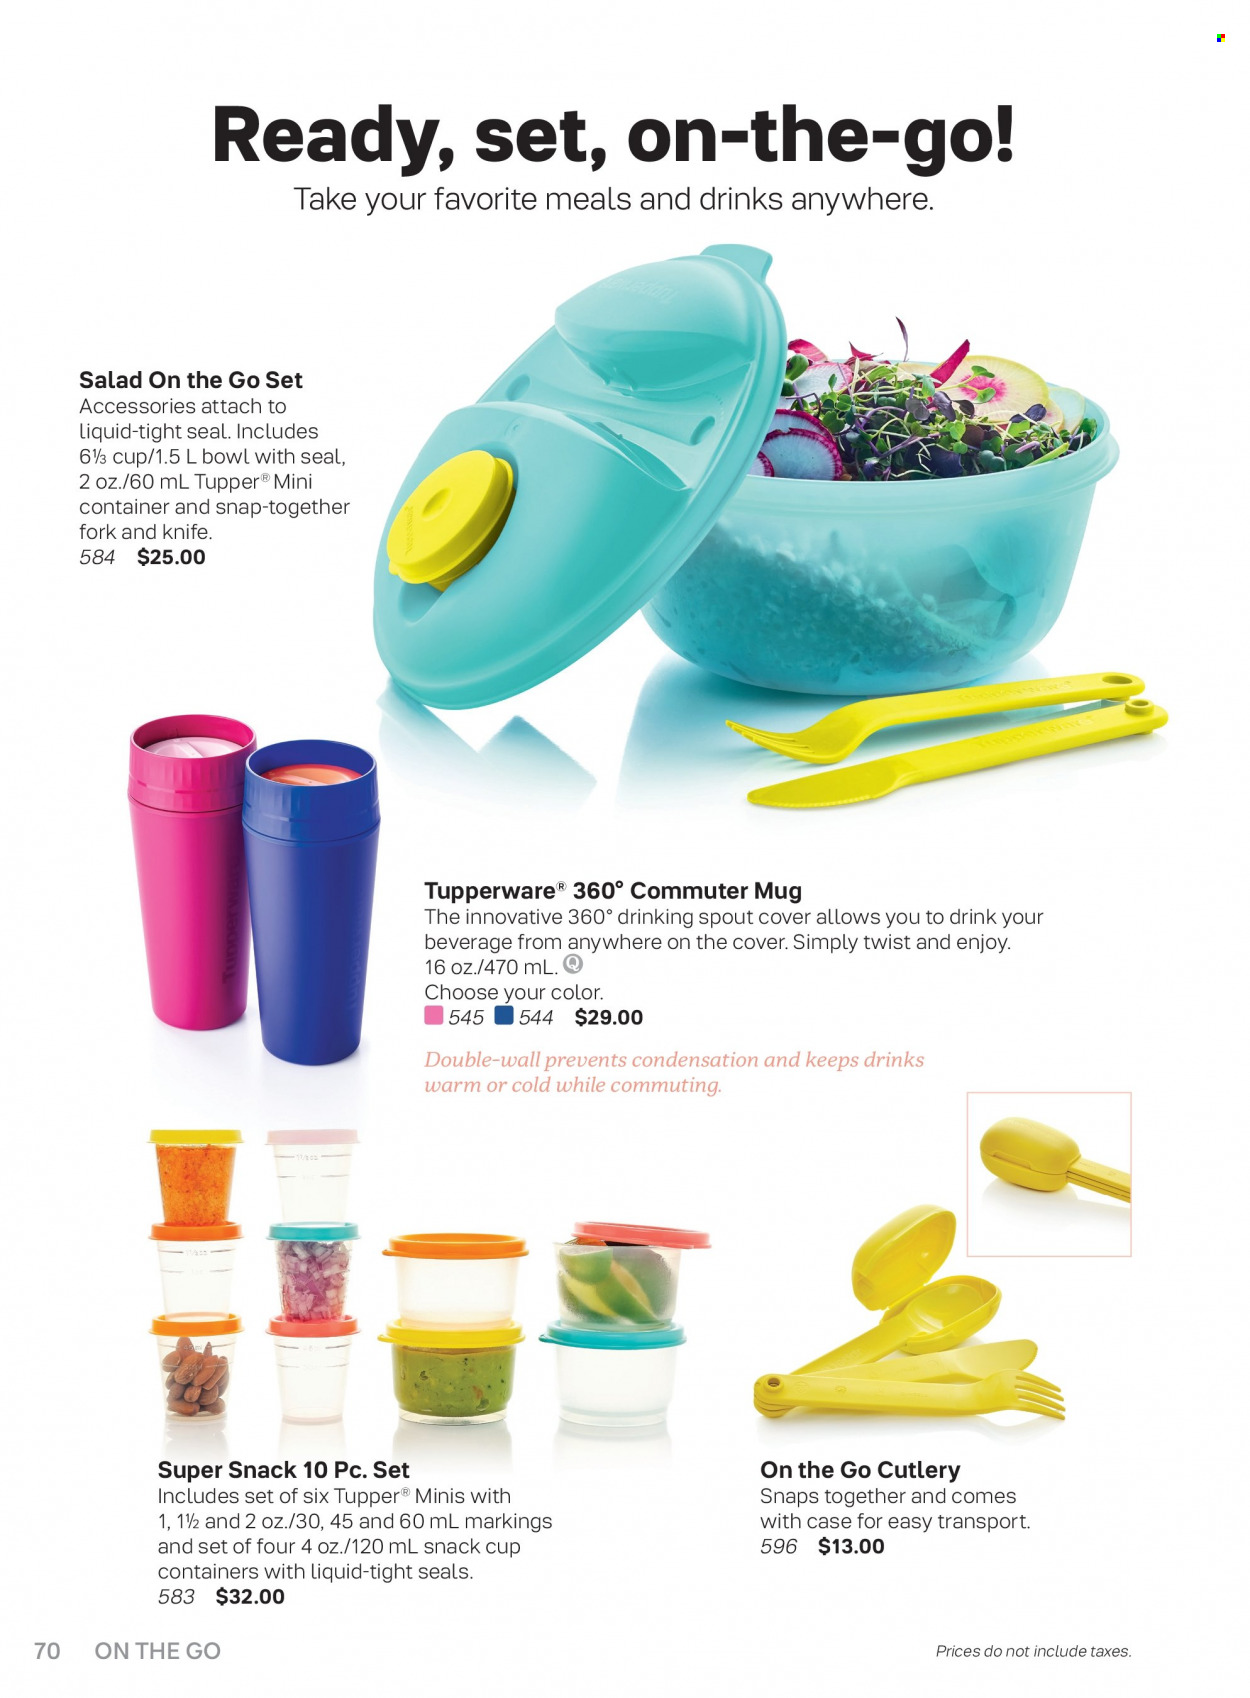 Circulaire Tupperware . Page 70.